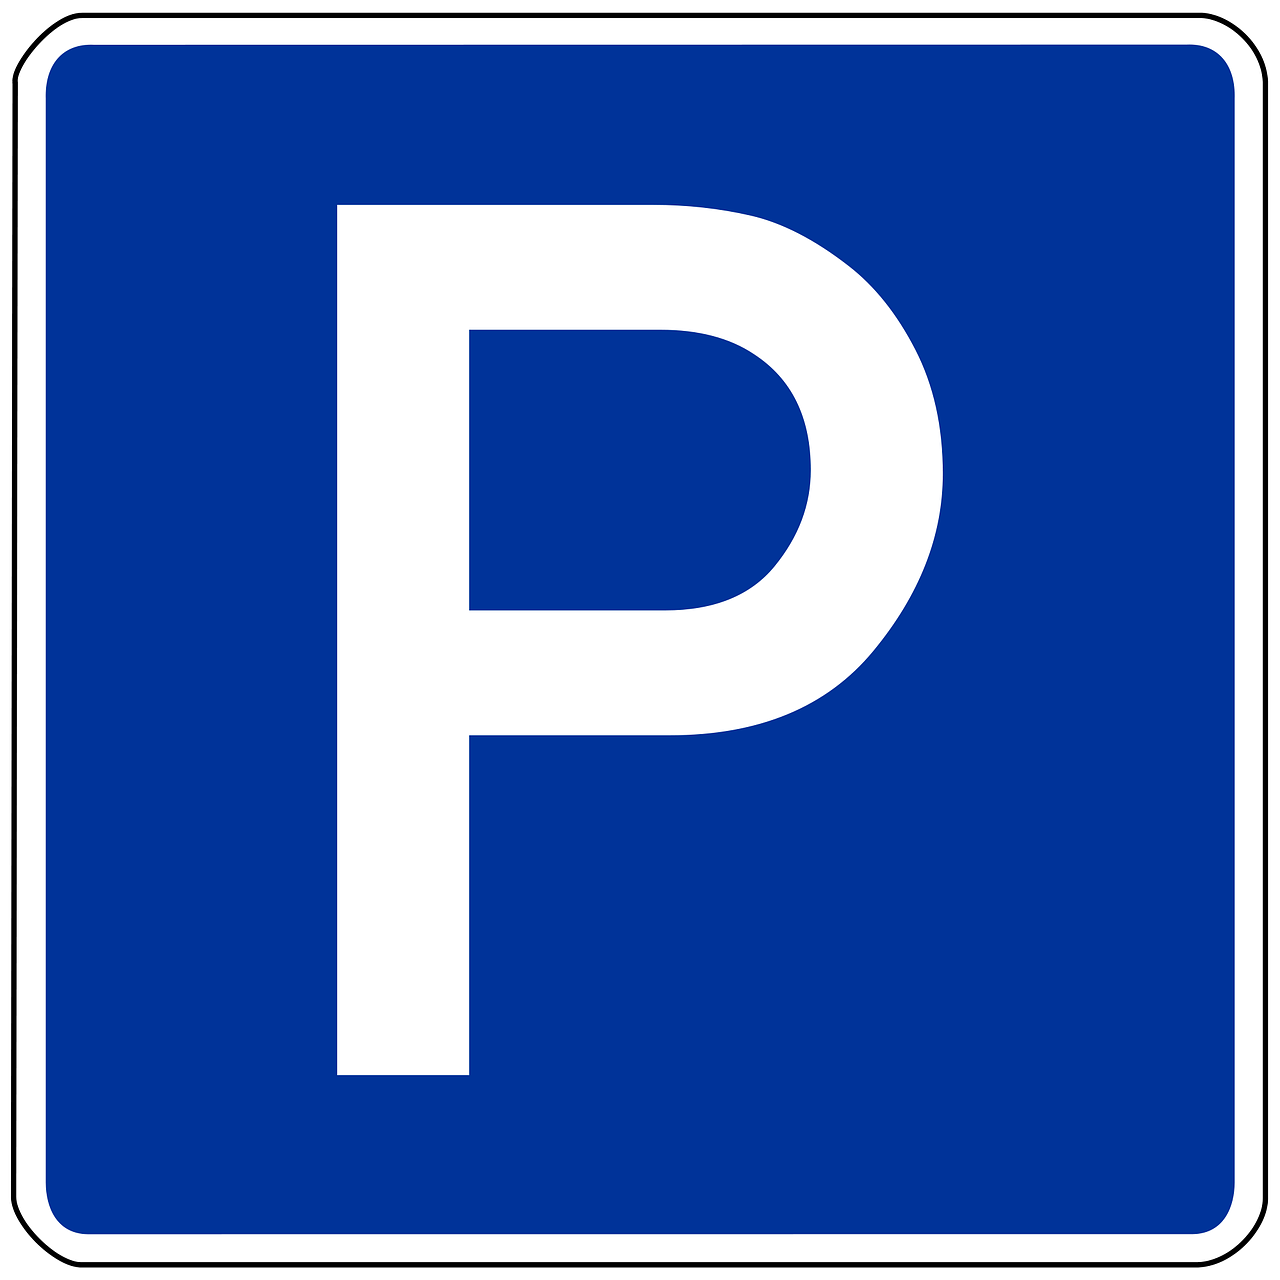 a blue parking sign with a white letter p on it, plasticien, vectorised, kindchenschema, monaco, high traffic